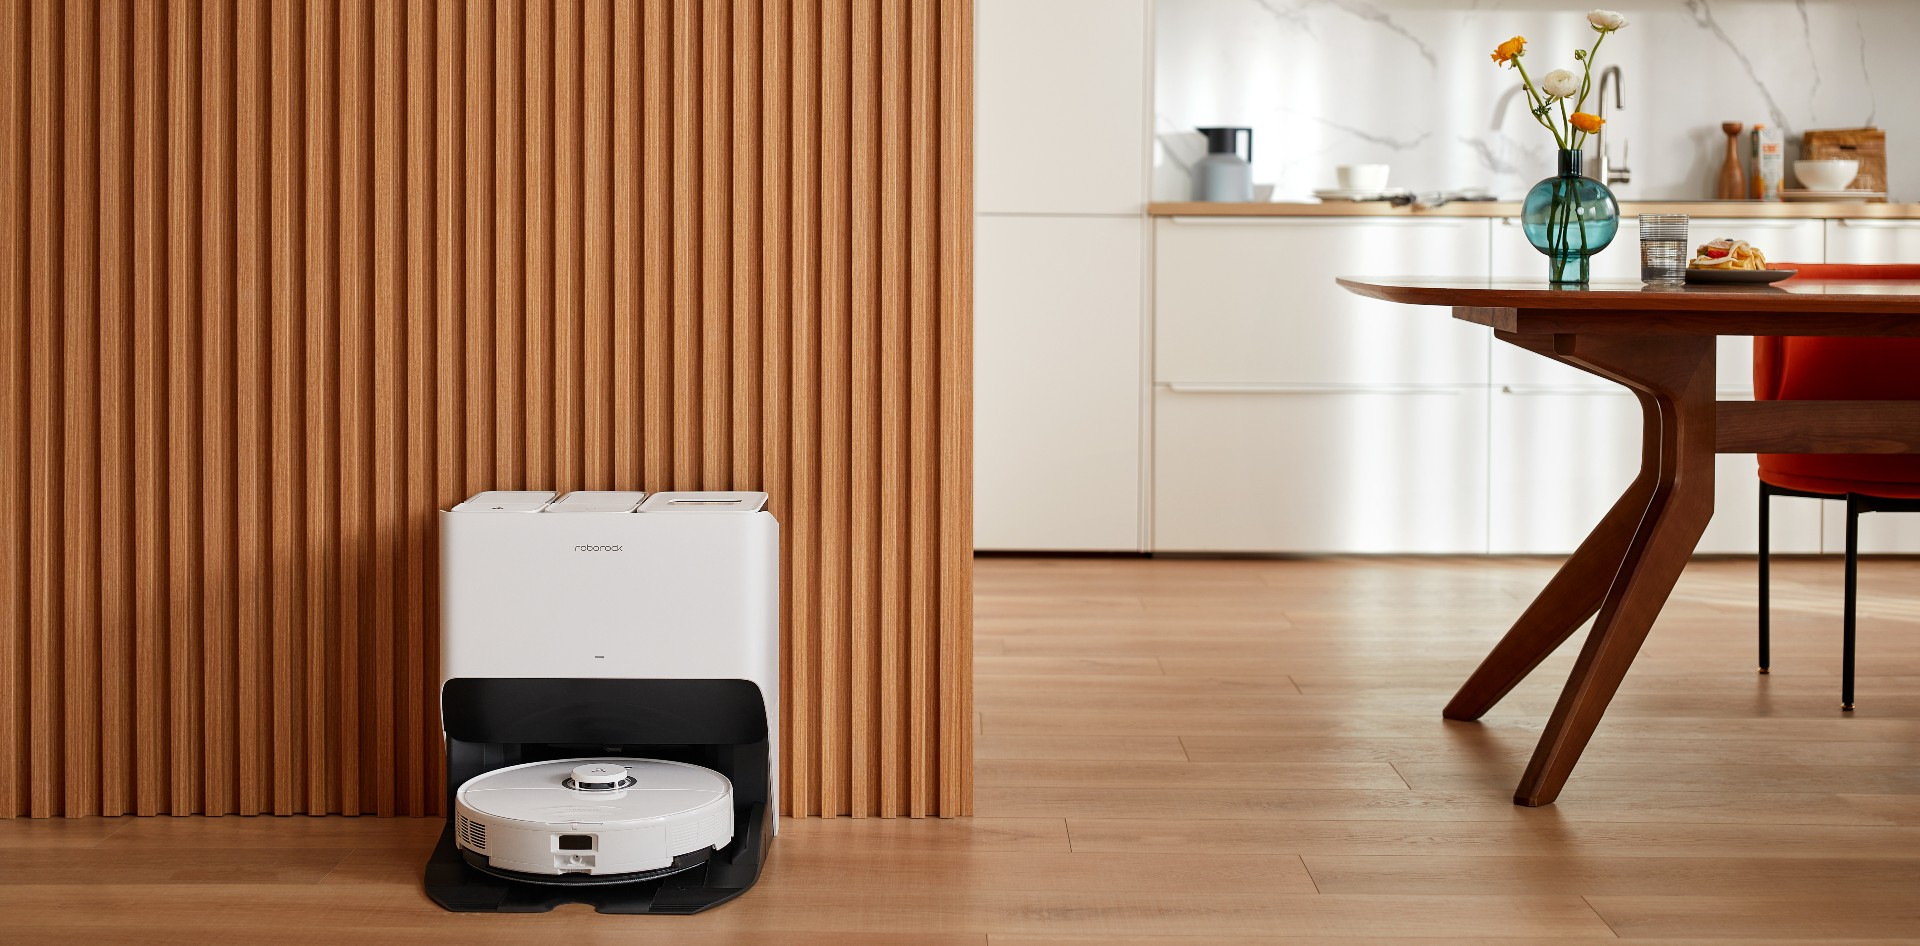 The high-tech Roborock S8 Pro Ultra is an elegant way to clean your floors,  $300 off - 9to5Mac